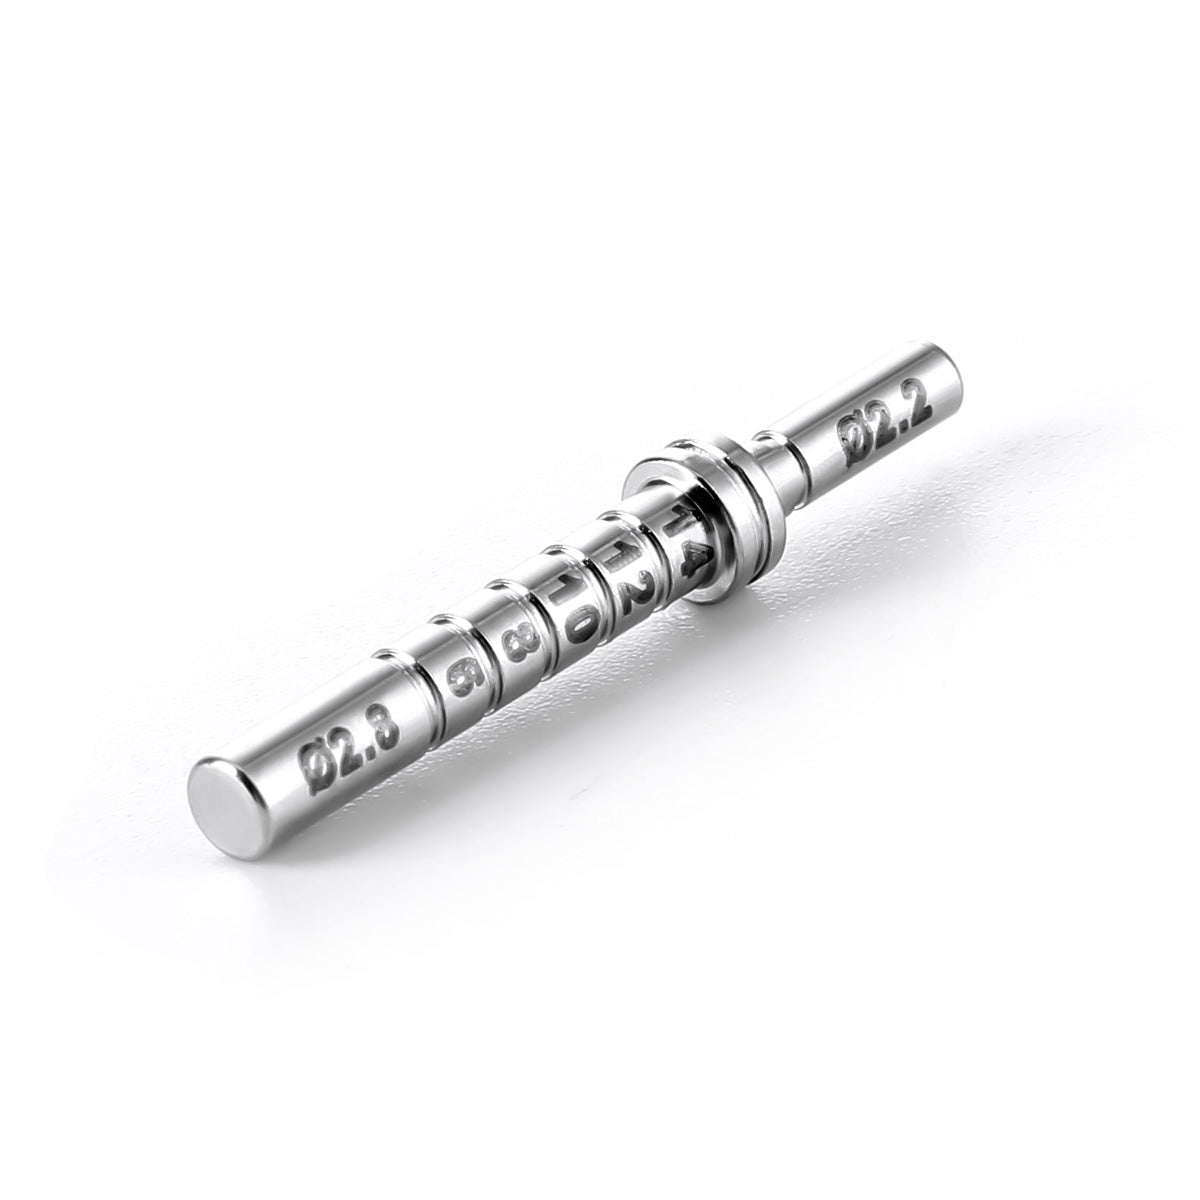 Dental Implant Depth Gauge Pin Stainless Steel Double Head 2.2/2.8mm 1pc/Pack - azdentall.com